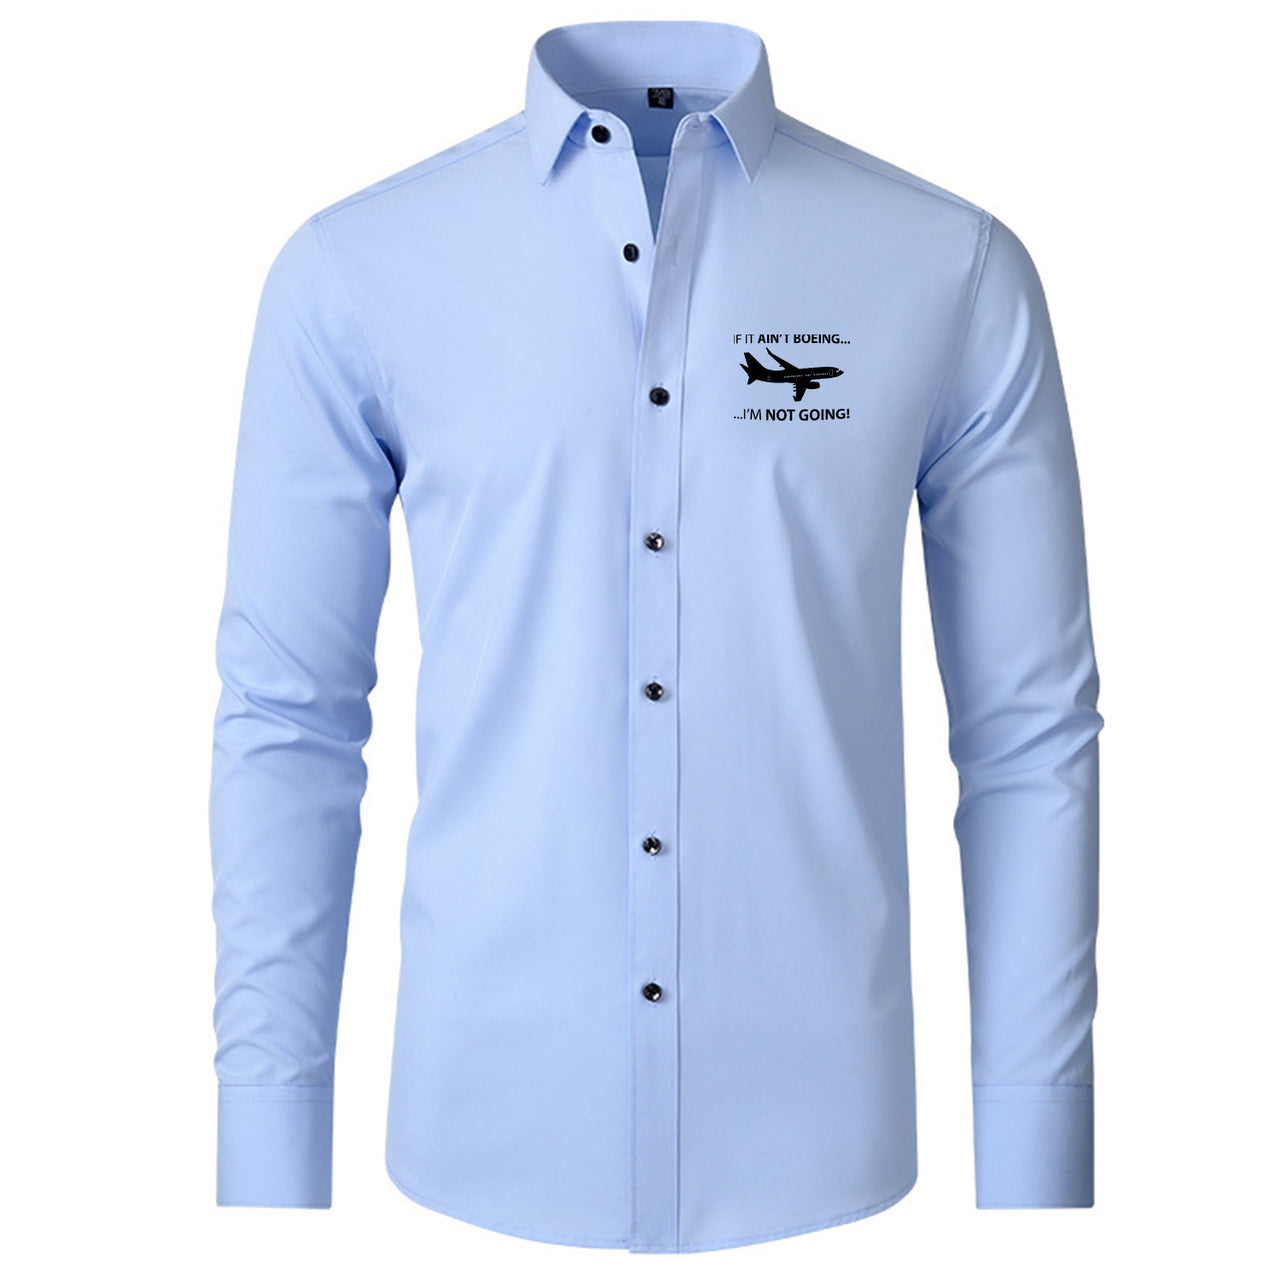 If It Ain't Boeing I'm Not Going! Designed Long Sleeve Shirts